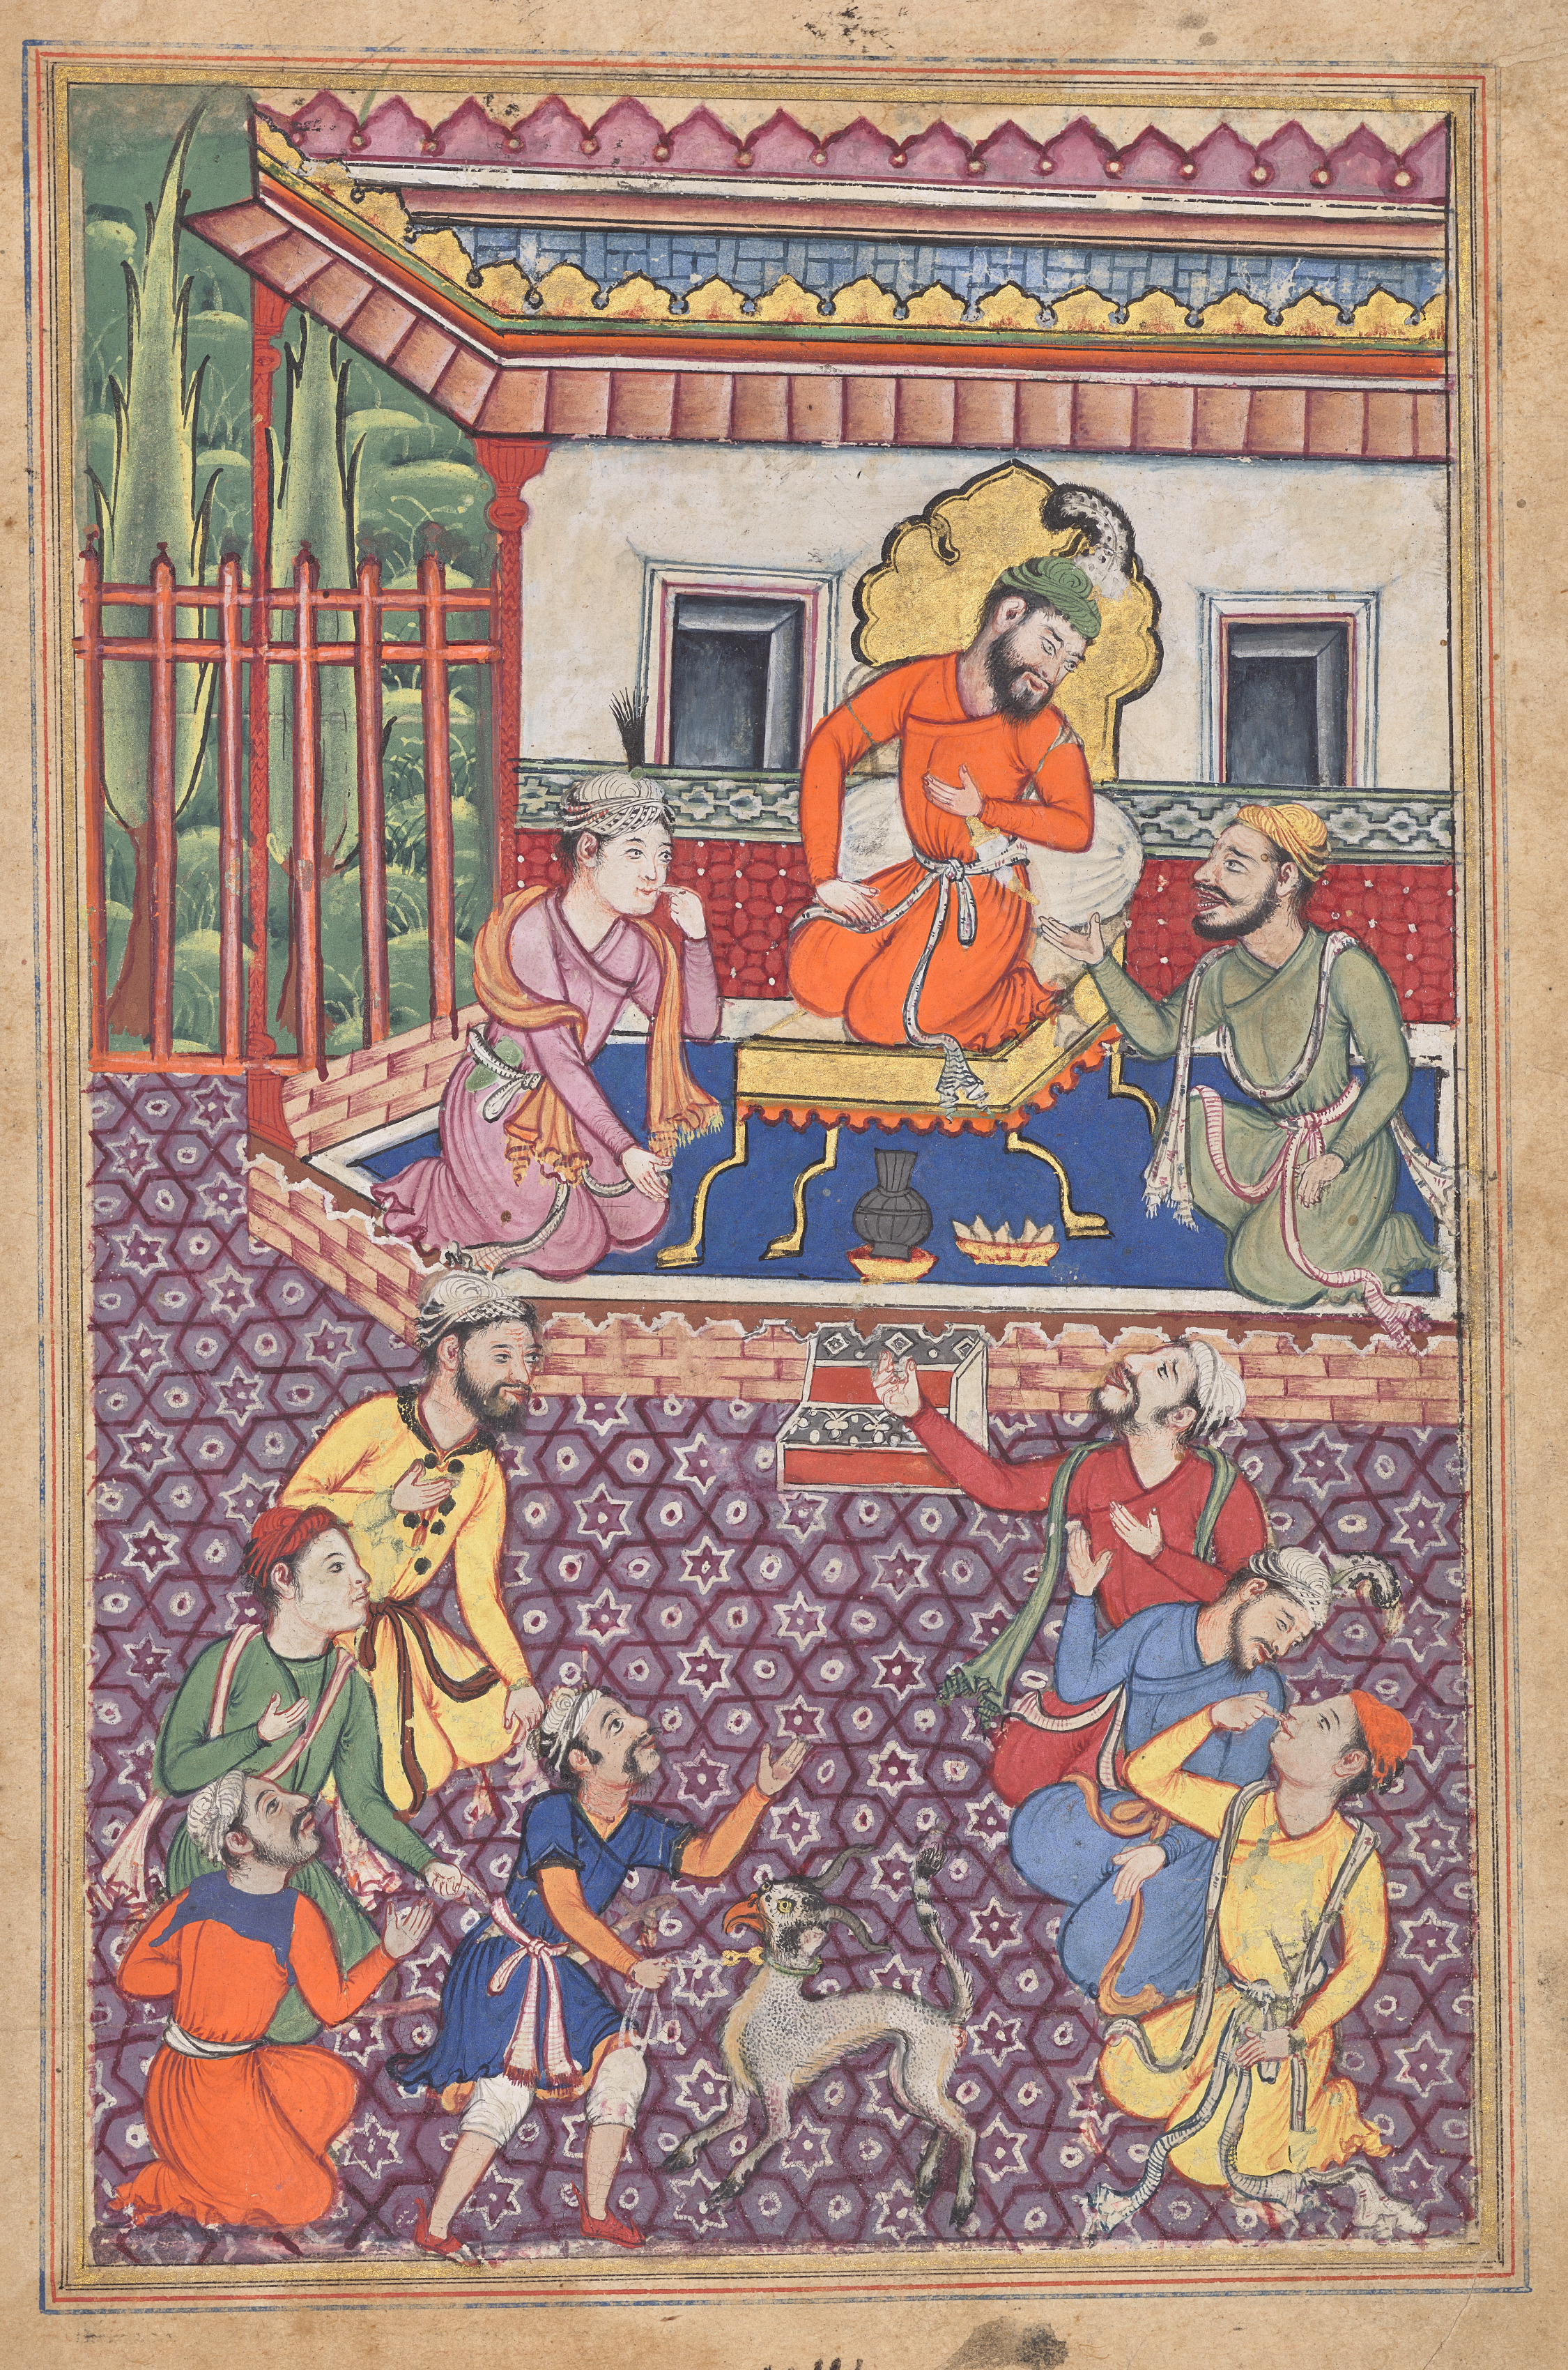 The court of the Raja of Ujjain, from a Tuti-nama (Tales of a Parrot): Forty-sixth Night